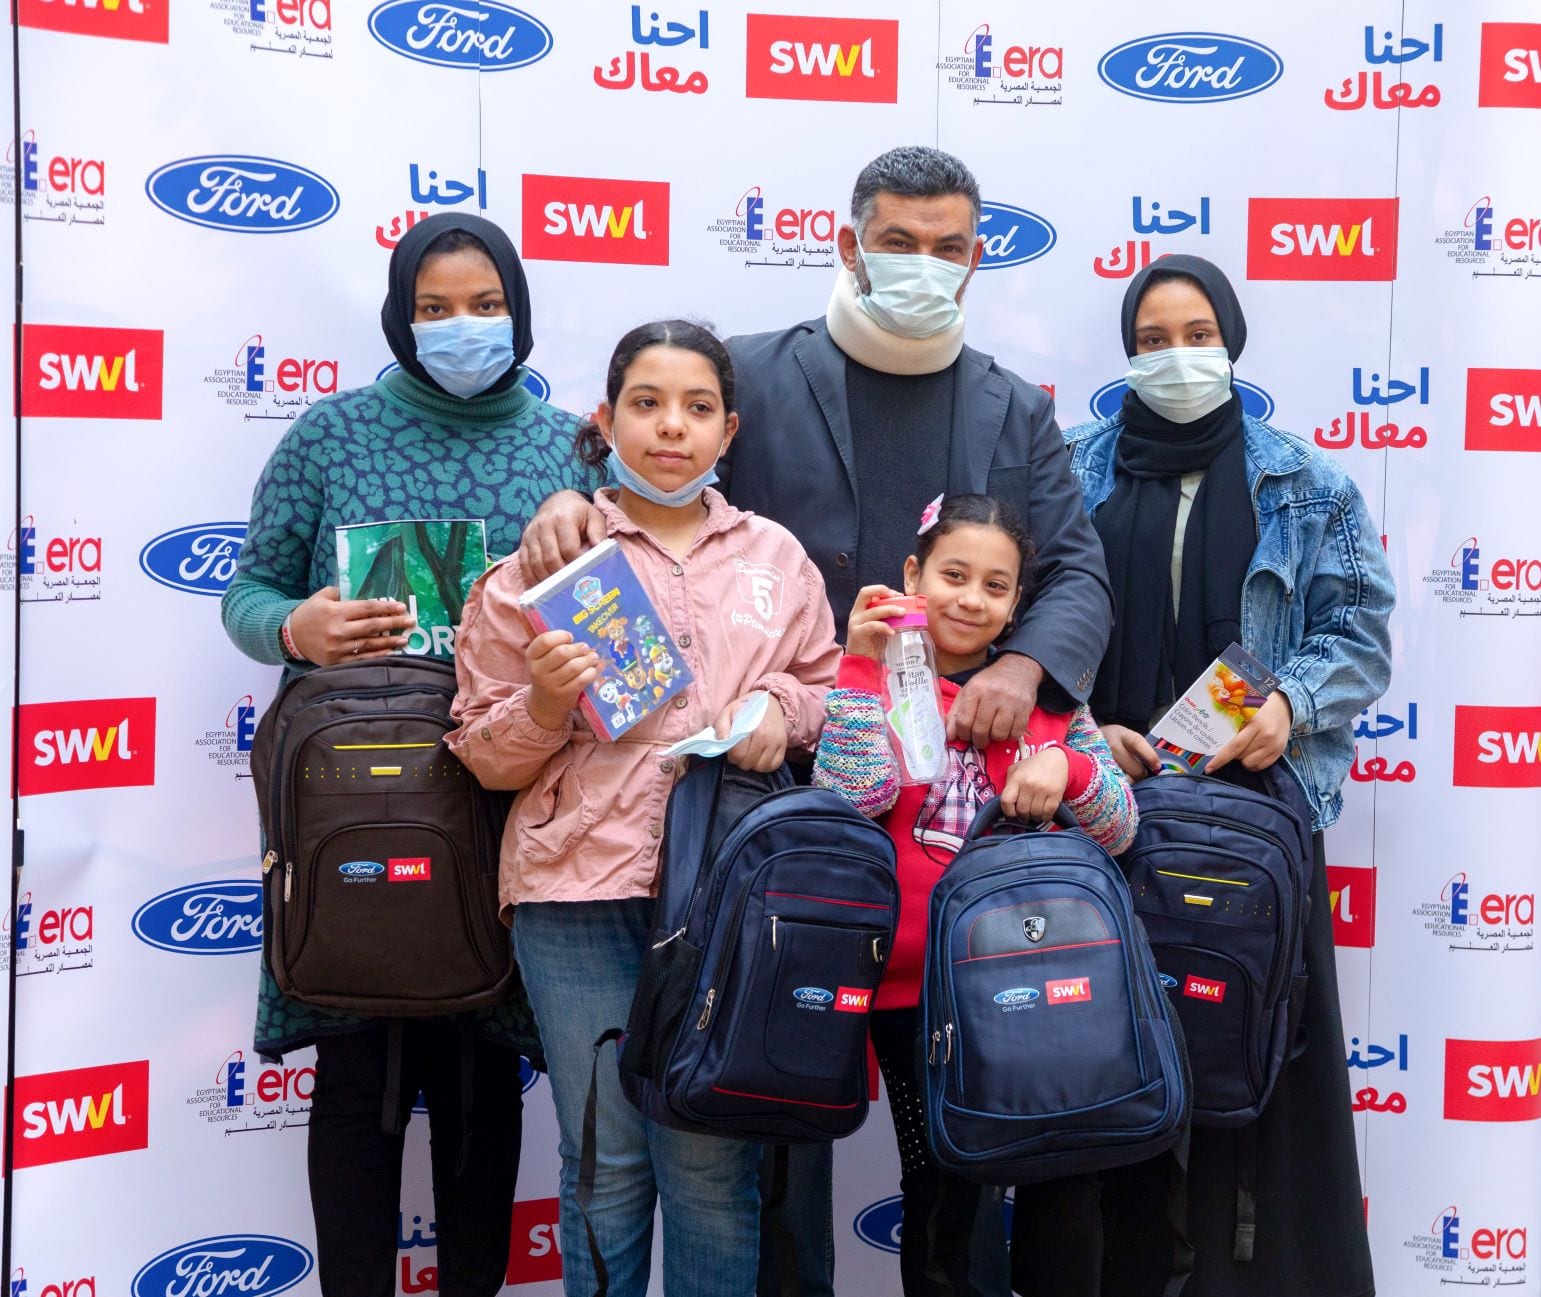 Ford Fund Donate EGP600,000 For Vital Education and Healthcare Supplies for SWVL Captains Children